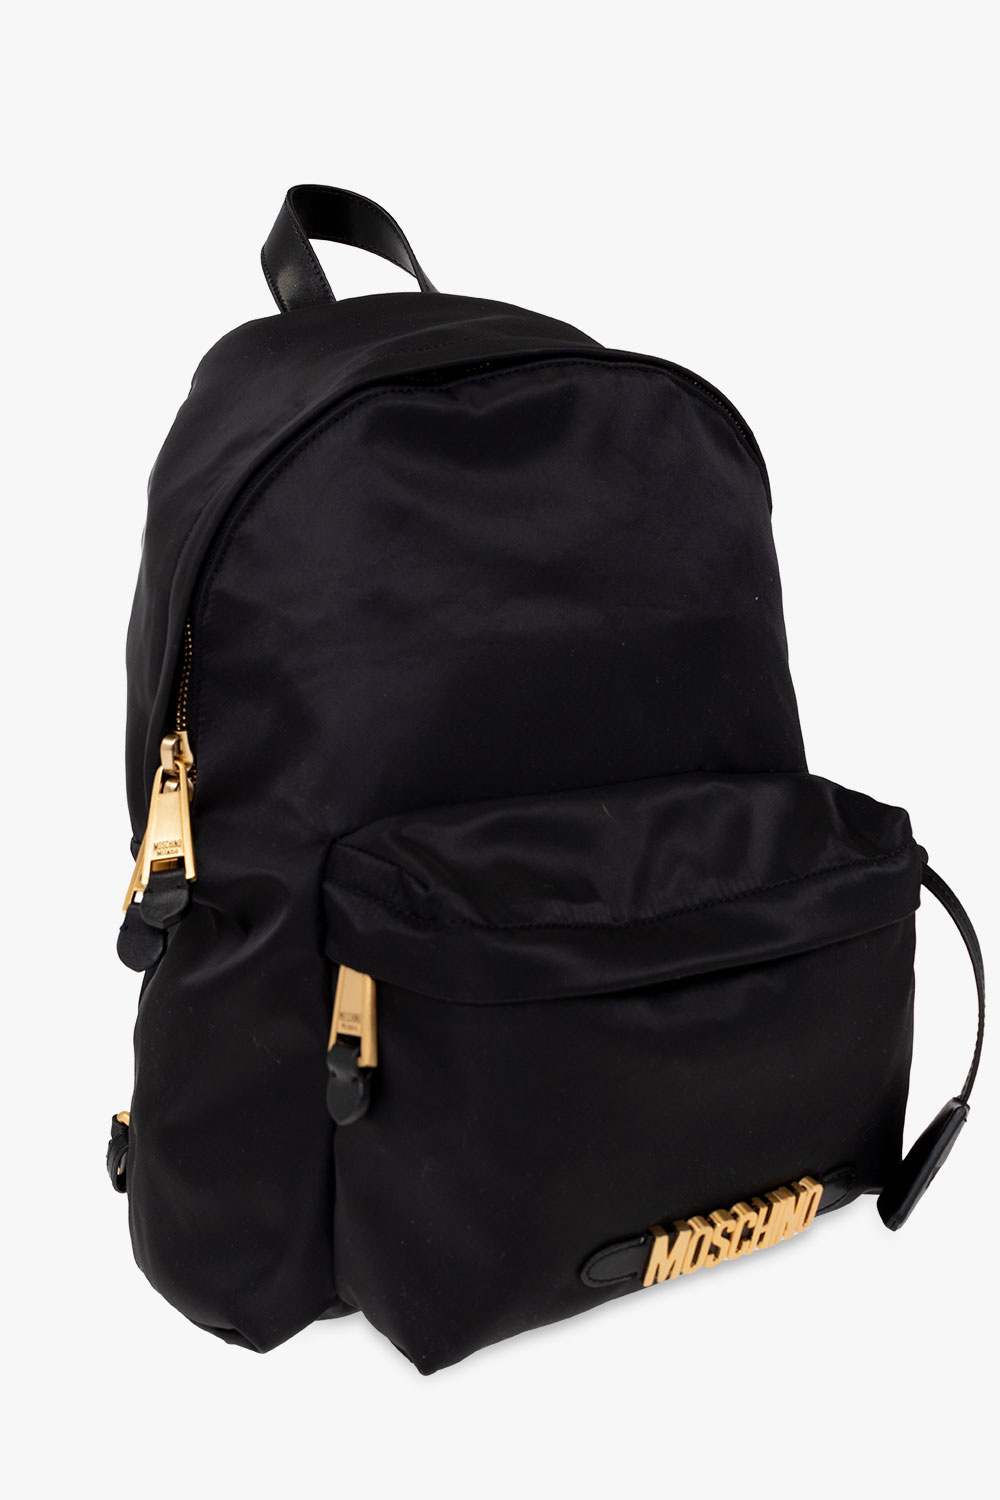 Moschino Backpack with Branca